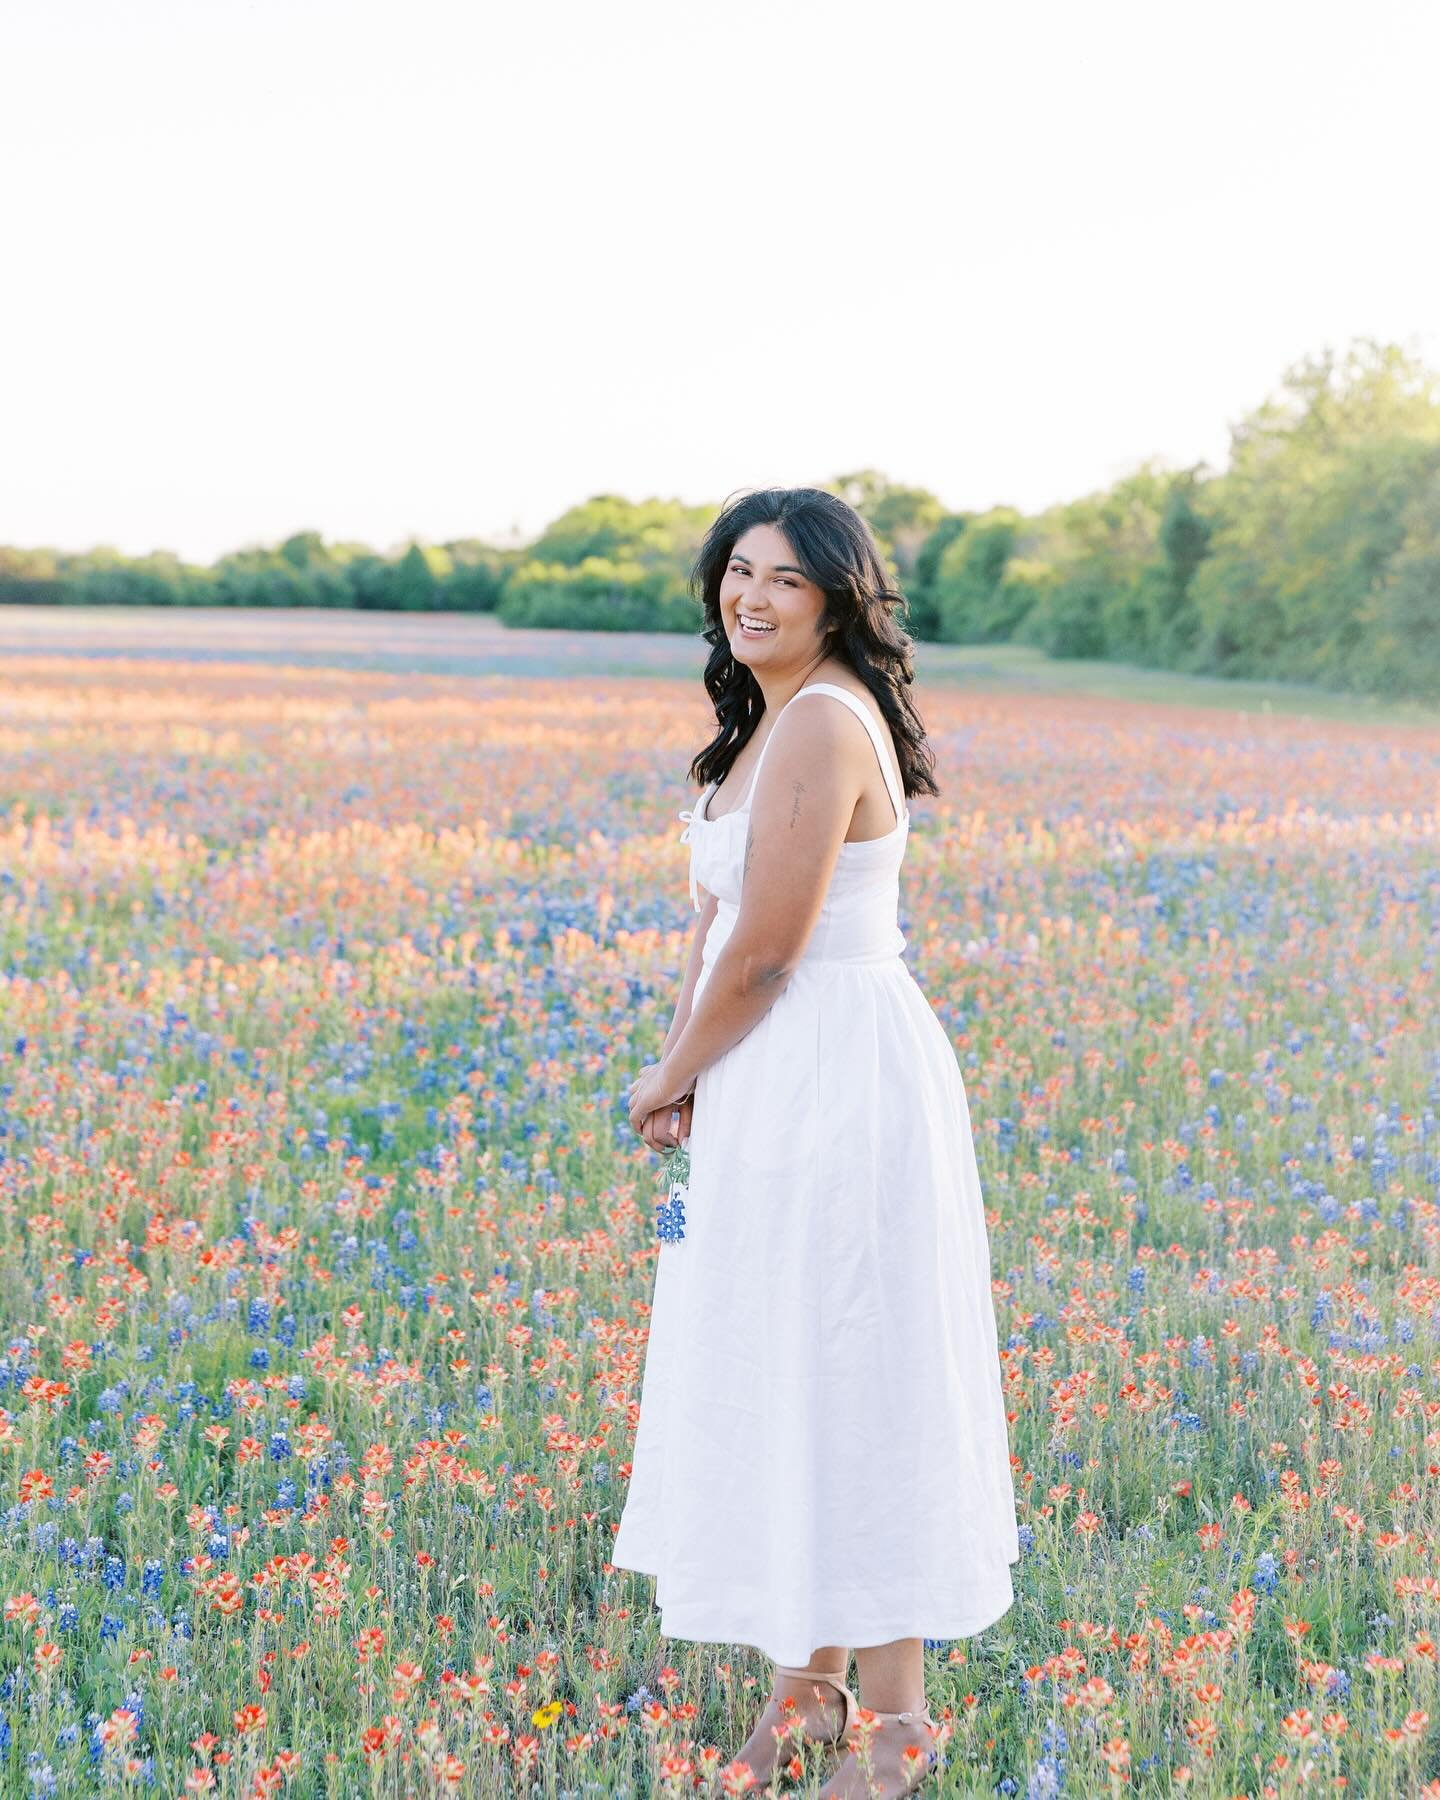 How perfect is this stunning linen @reformation dress on @corelle_rose for her graduation photos?! Channeling all the romantic french vibes for her portrait session in the Texas wildflowers 🎀🤍🌸 we spent the most perfect evening frolicking in the f